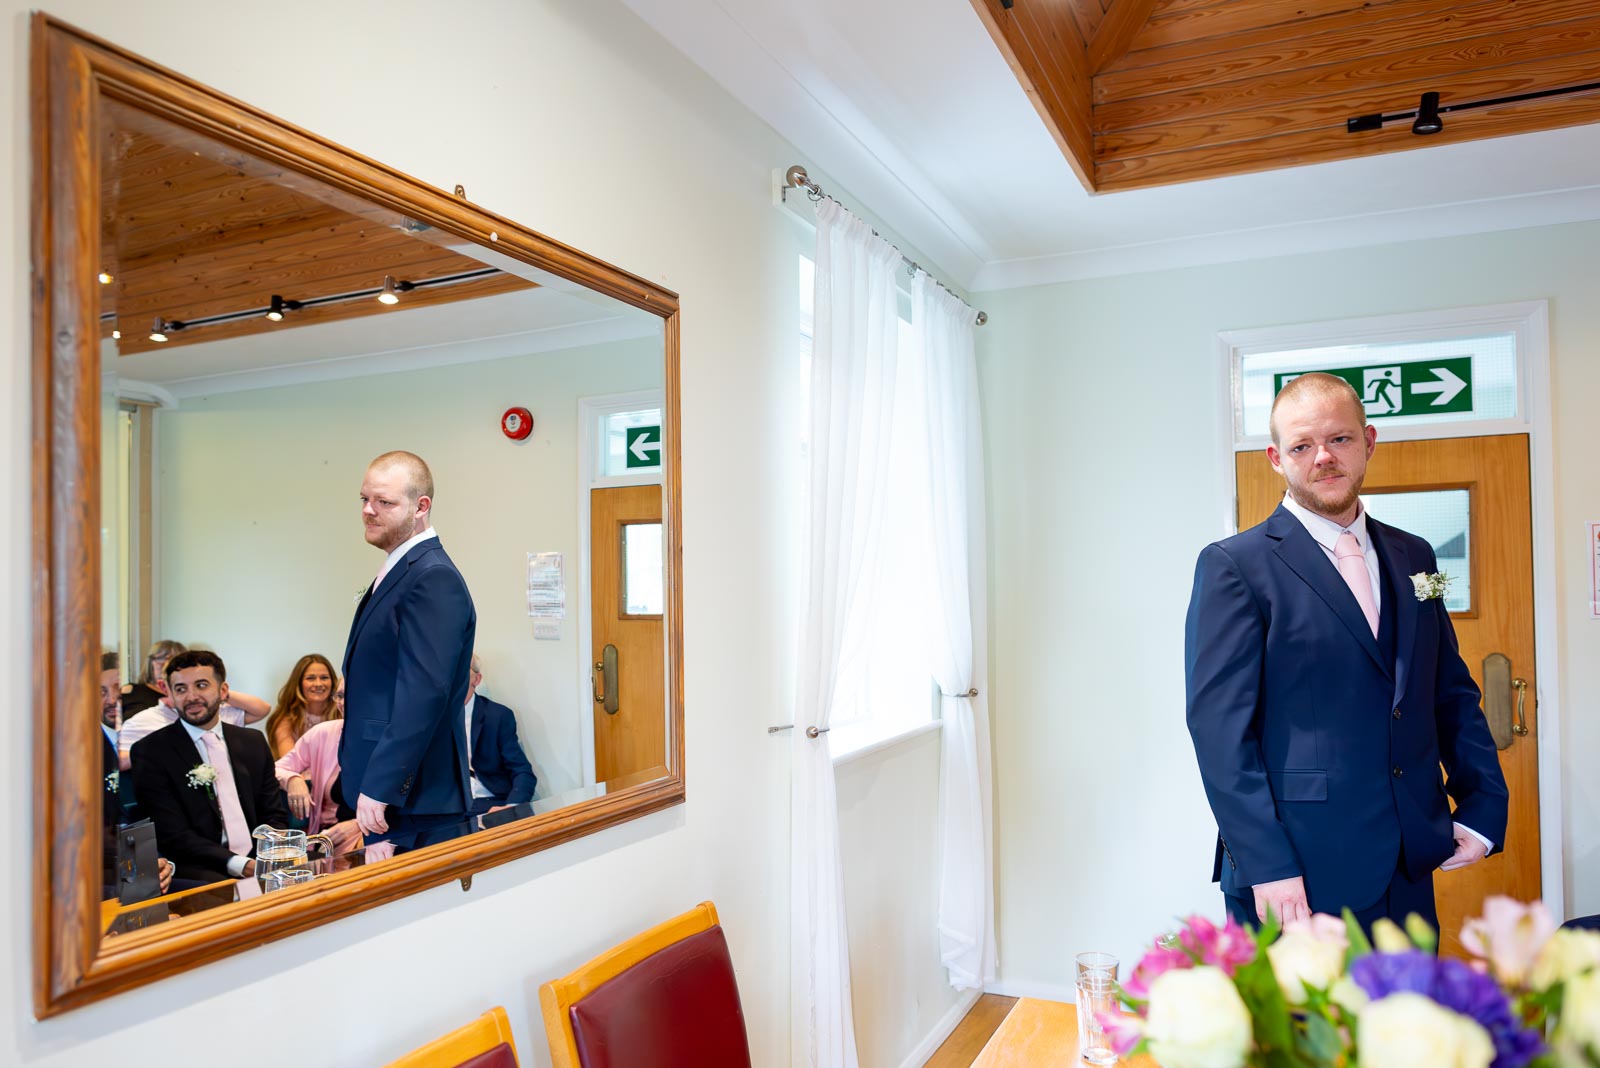 Steve waits at Haywards Heath Town to get married to Catherine